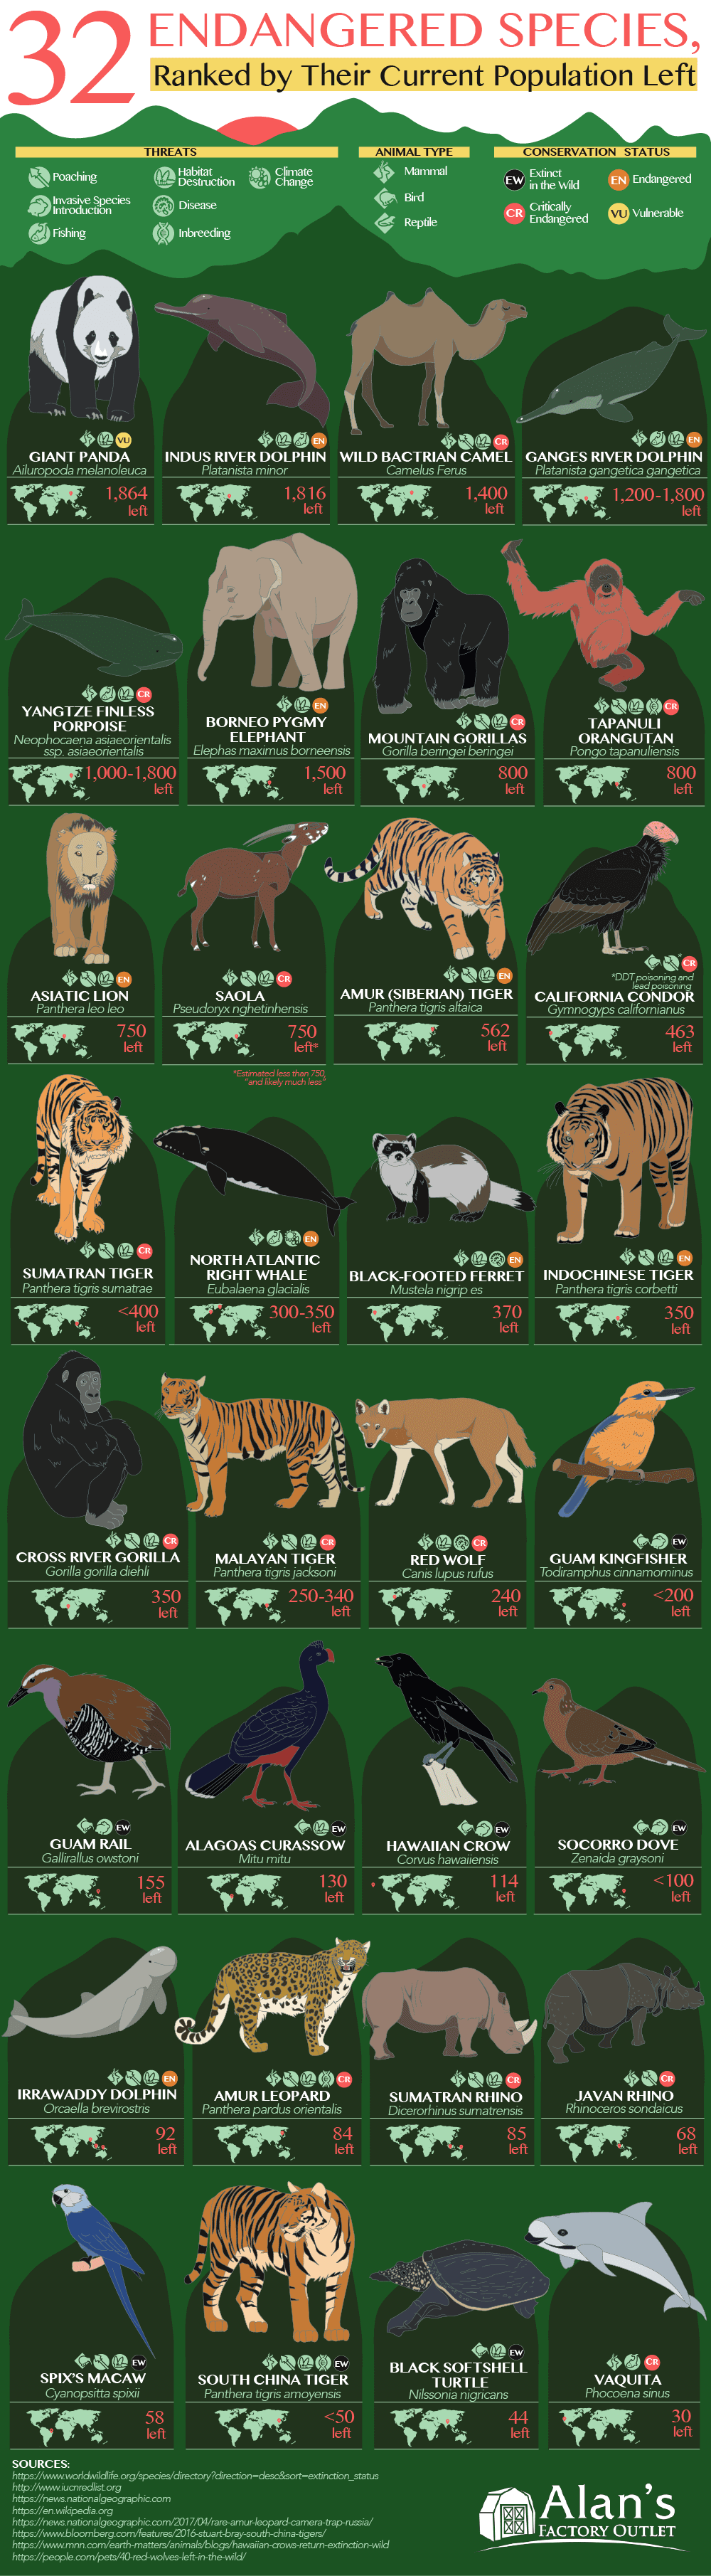 50 Weird Facts To Make You Love Animals | Daily Infographic